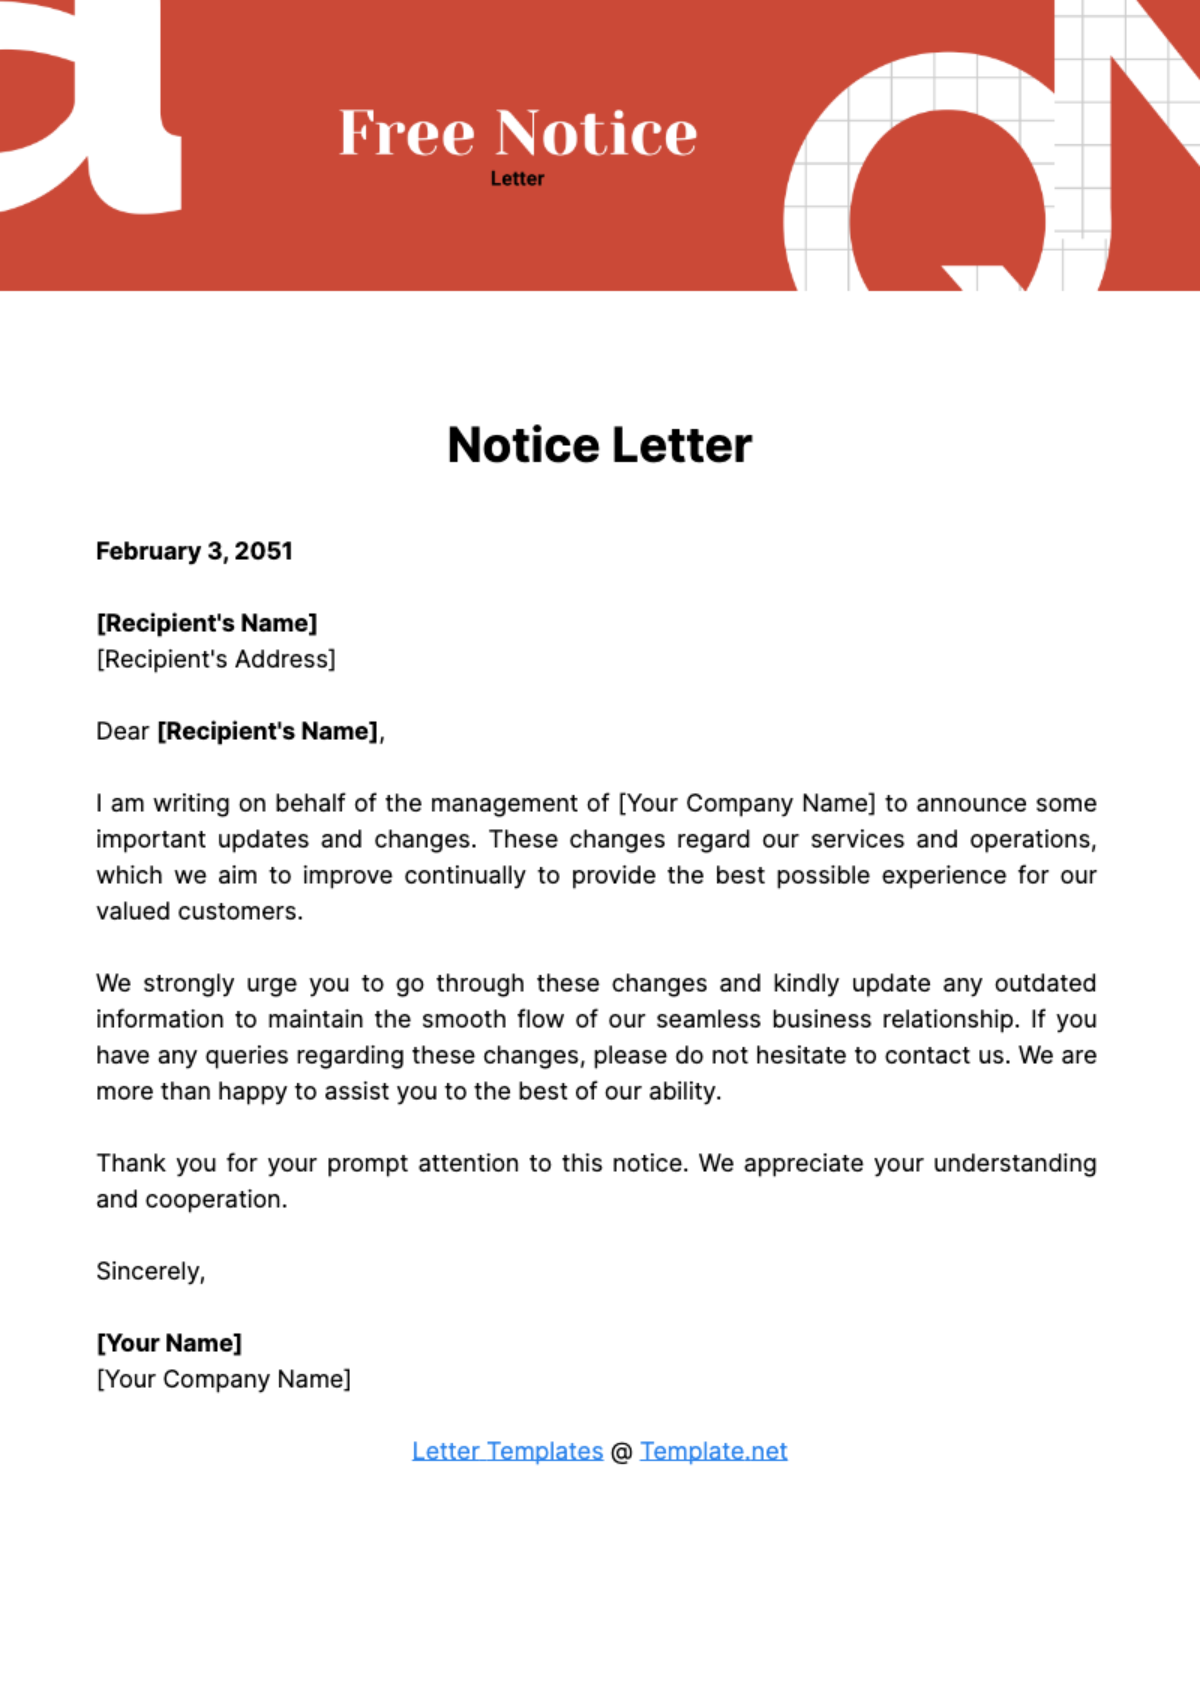 Free Notice Letter Template